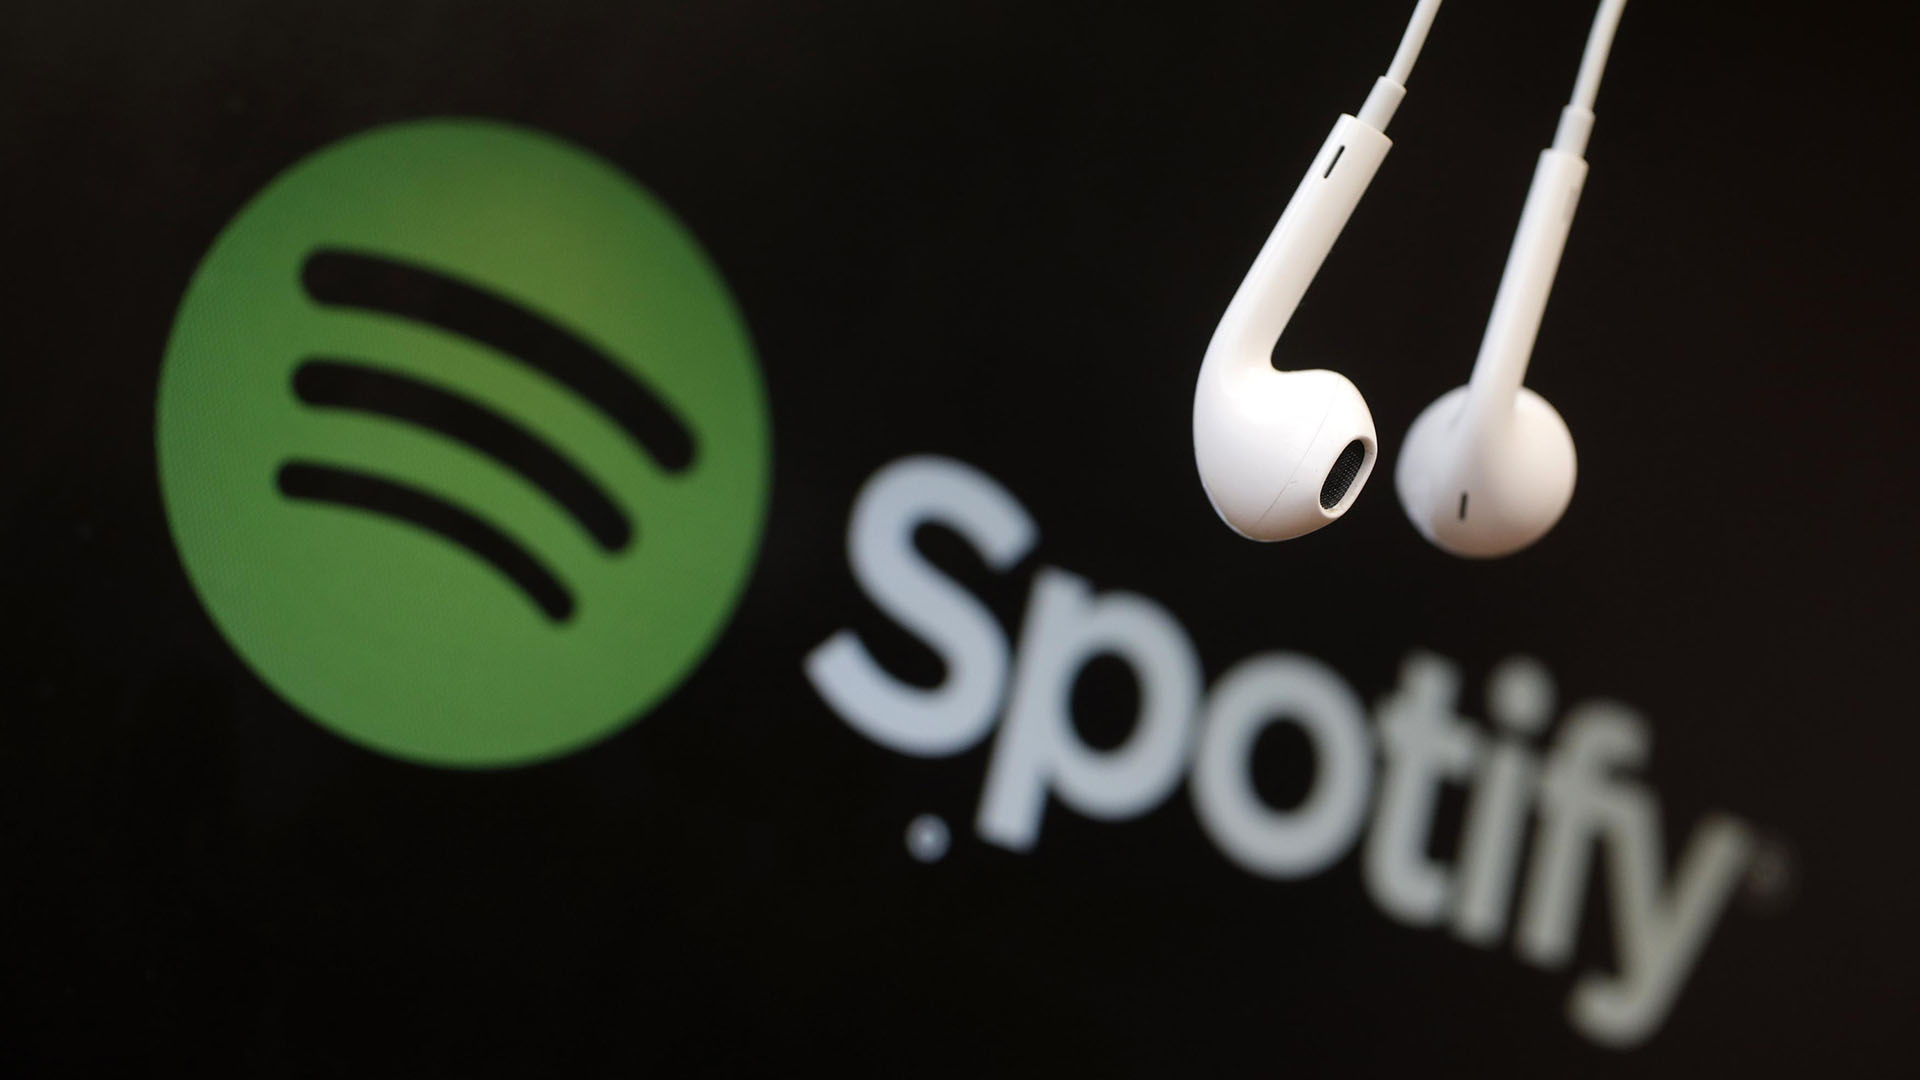 AI to make your Spotify Playlist better than Spotify's AI.